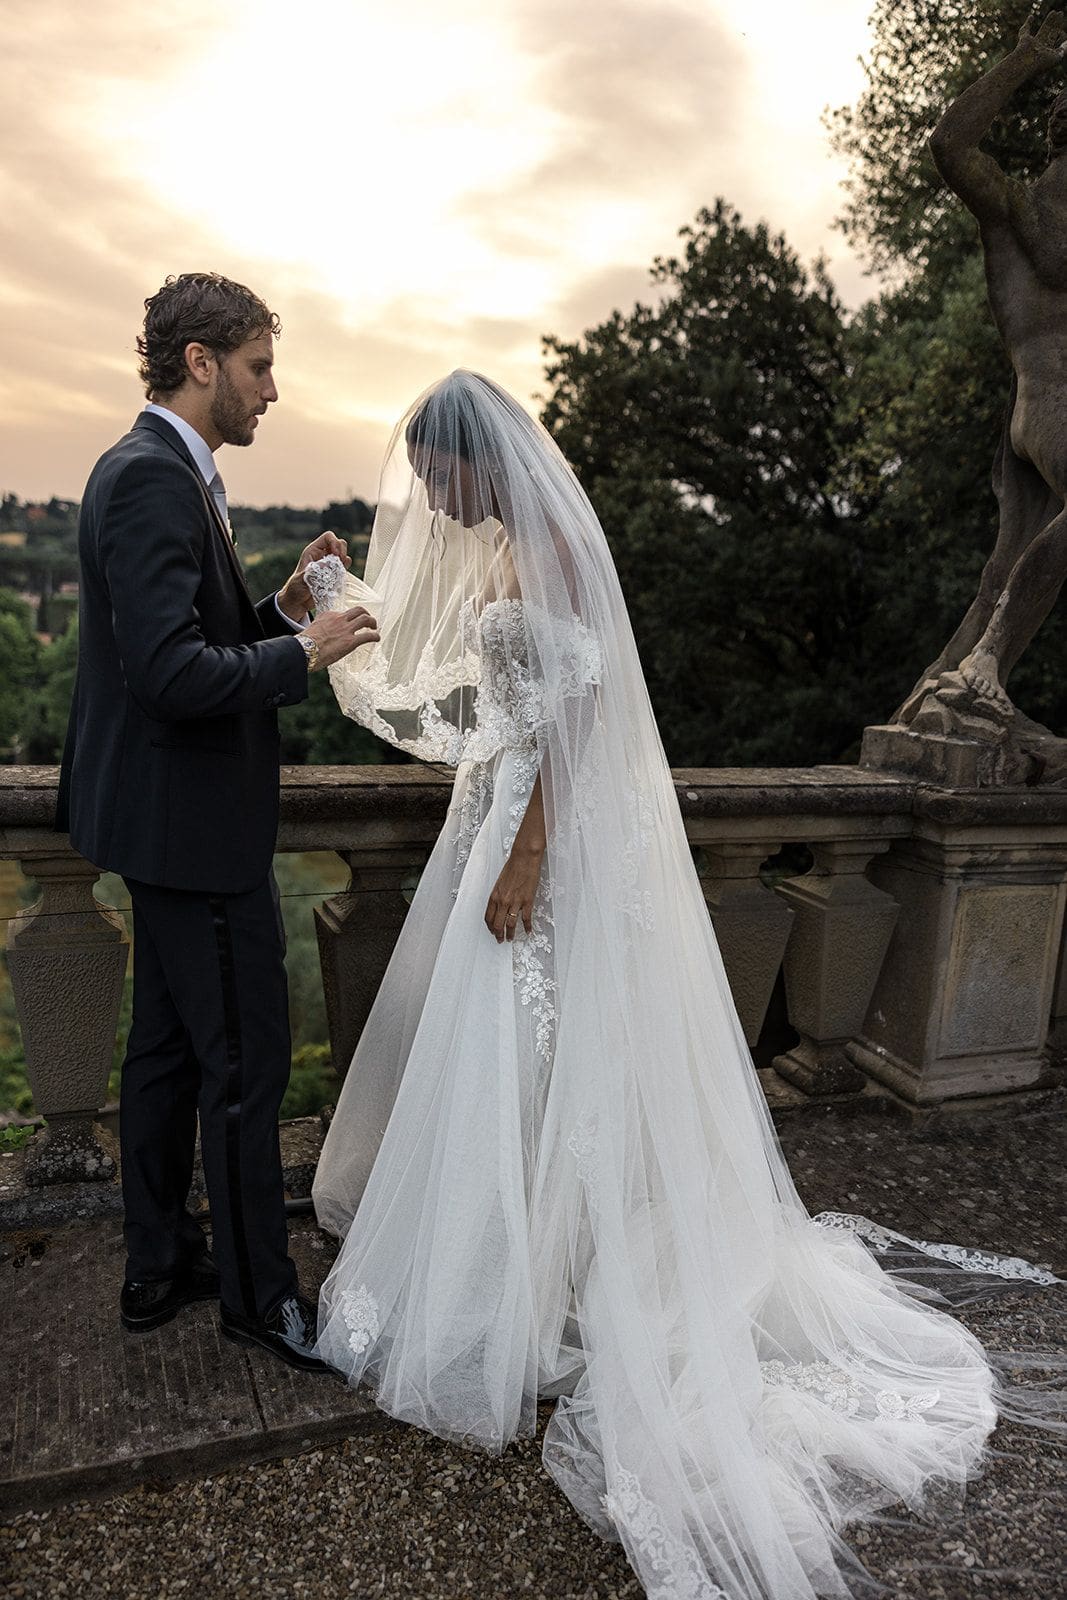 Groom lifts bride's veil outside of Fiesole wedding venue in Tuscany, Italy